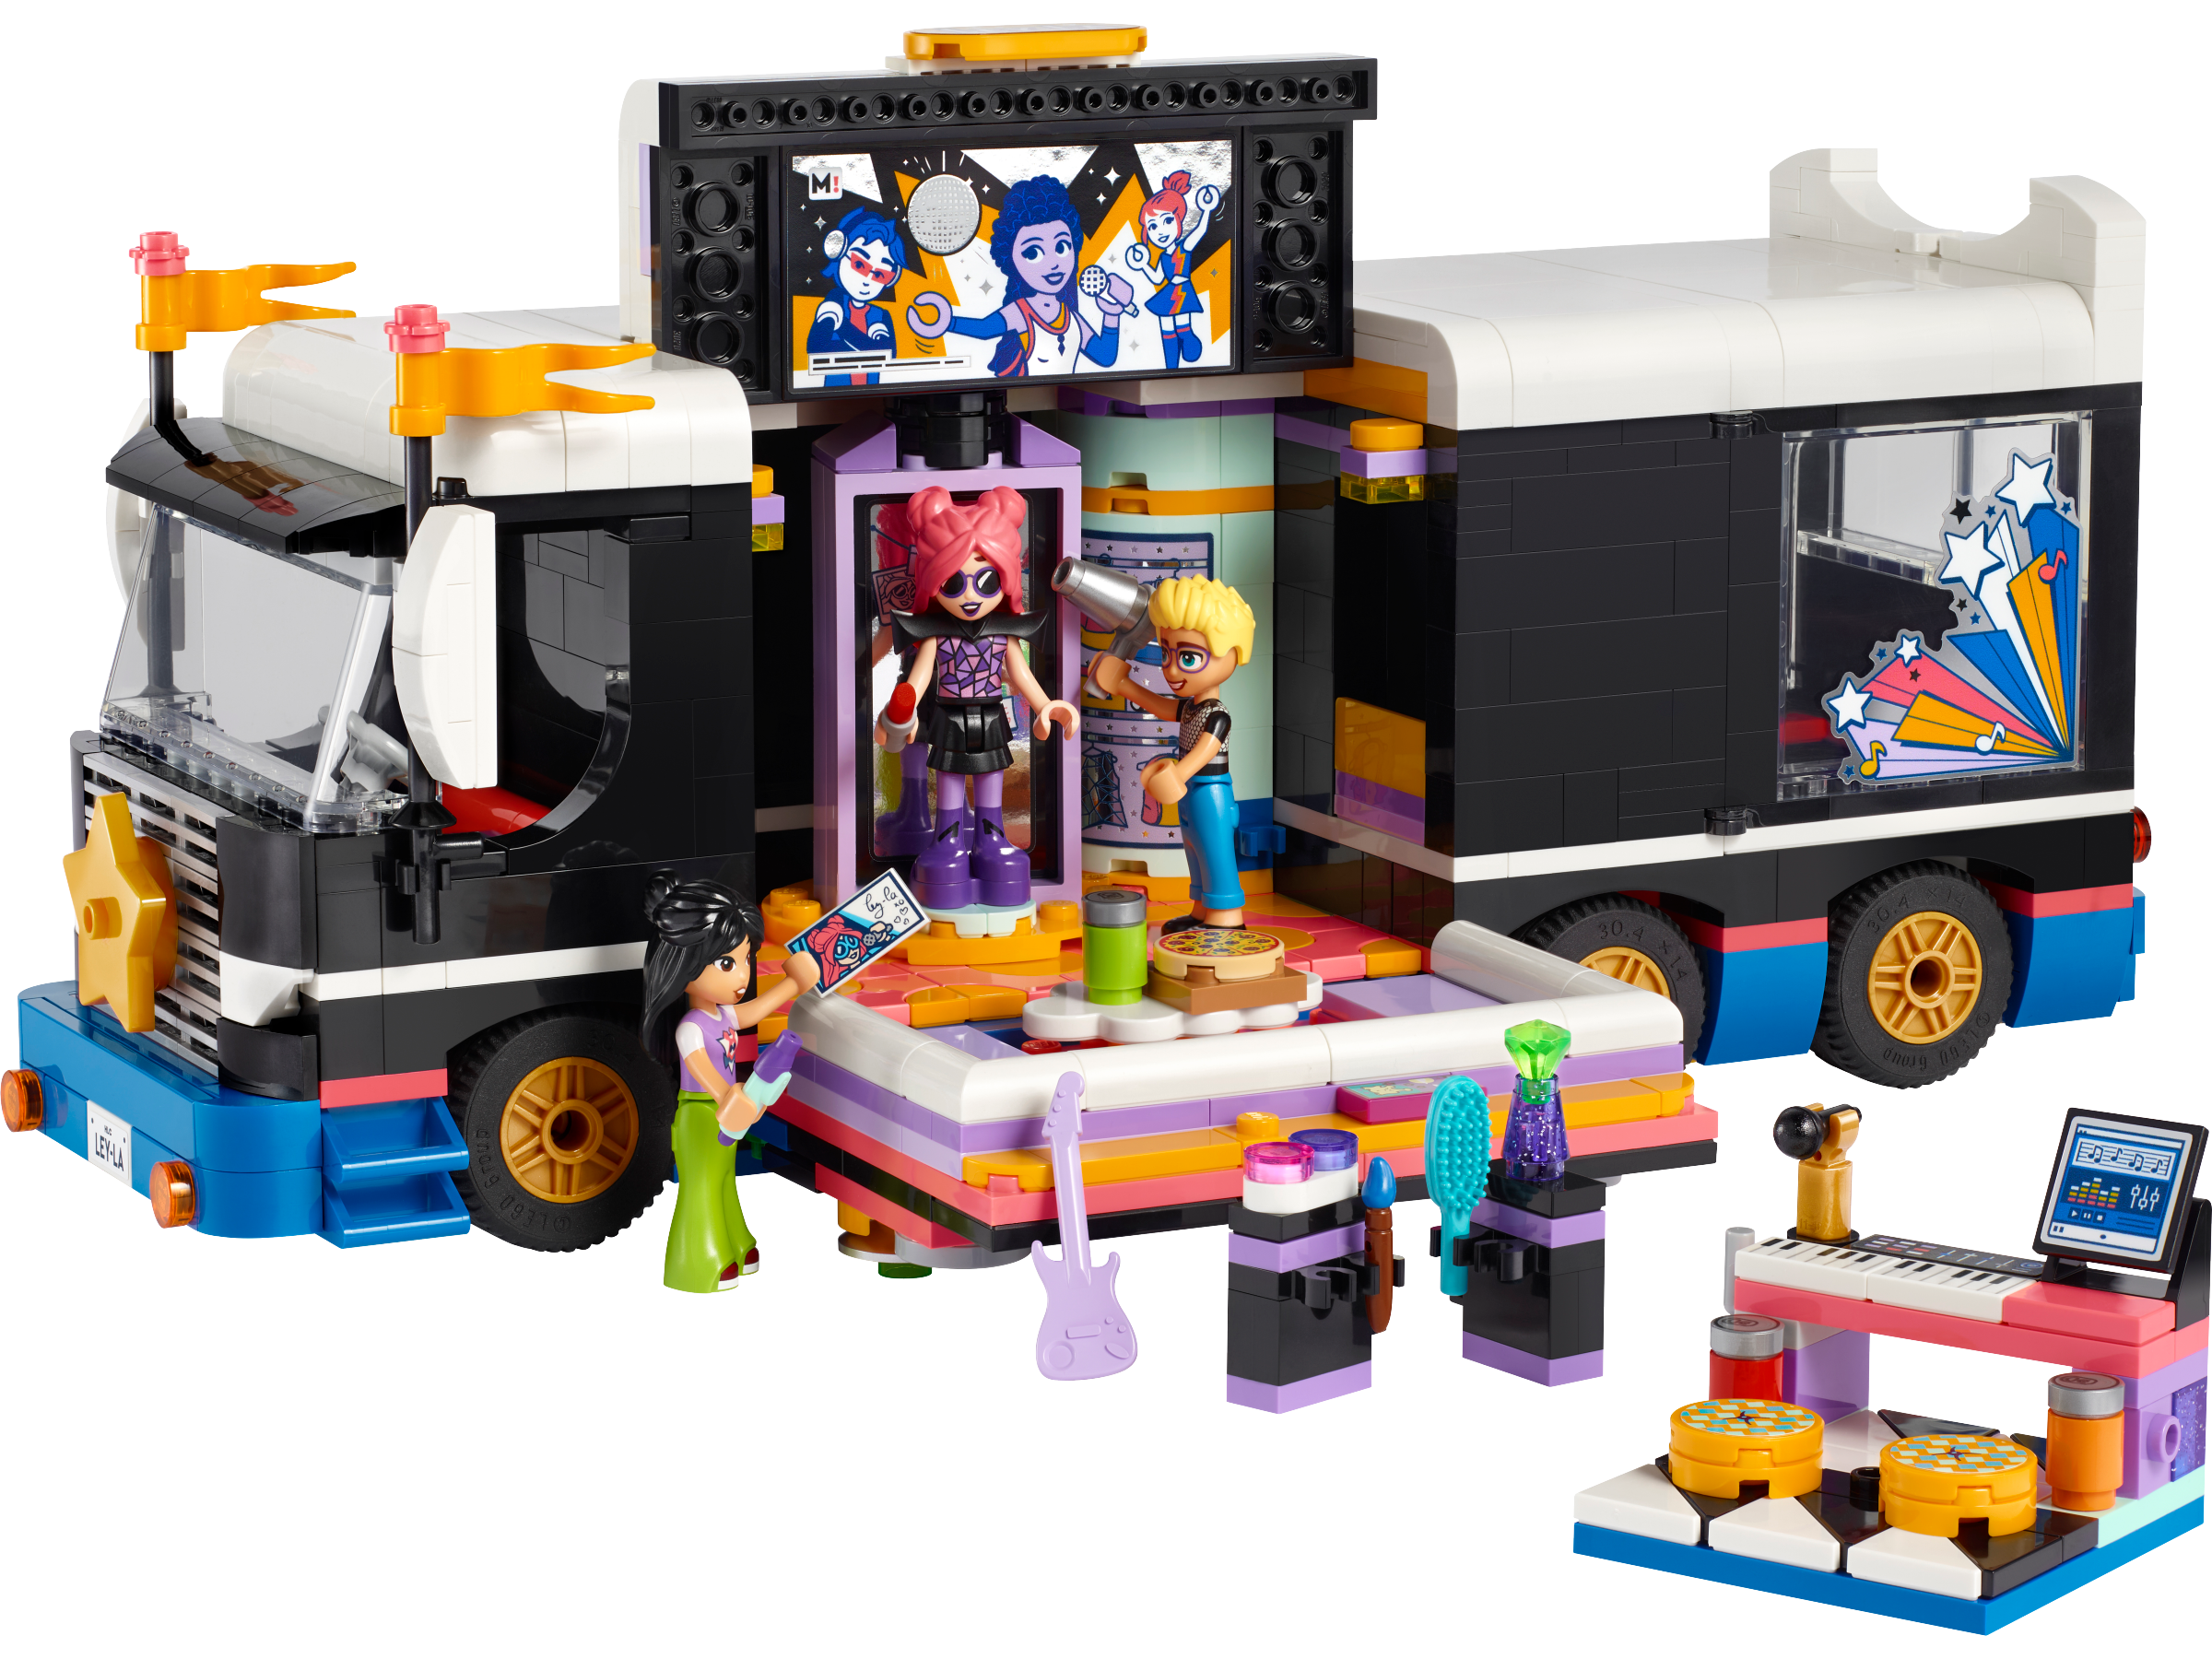 Paisley's House 41724 | Friends | Buy online at the Official LEGO® Shop US